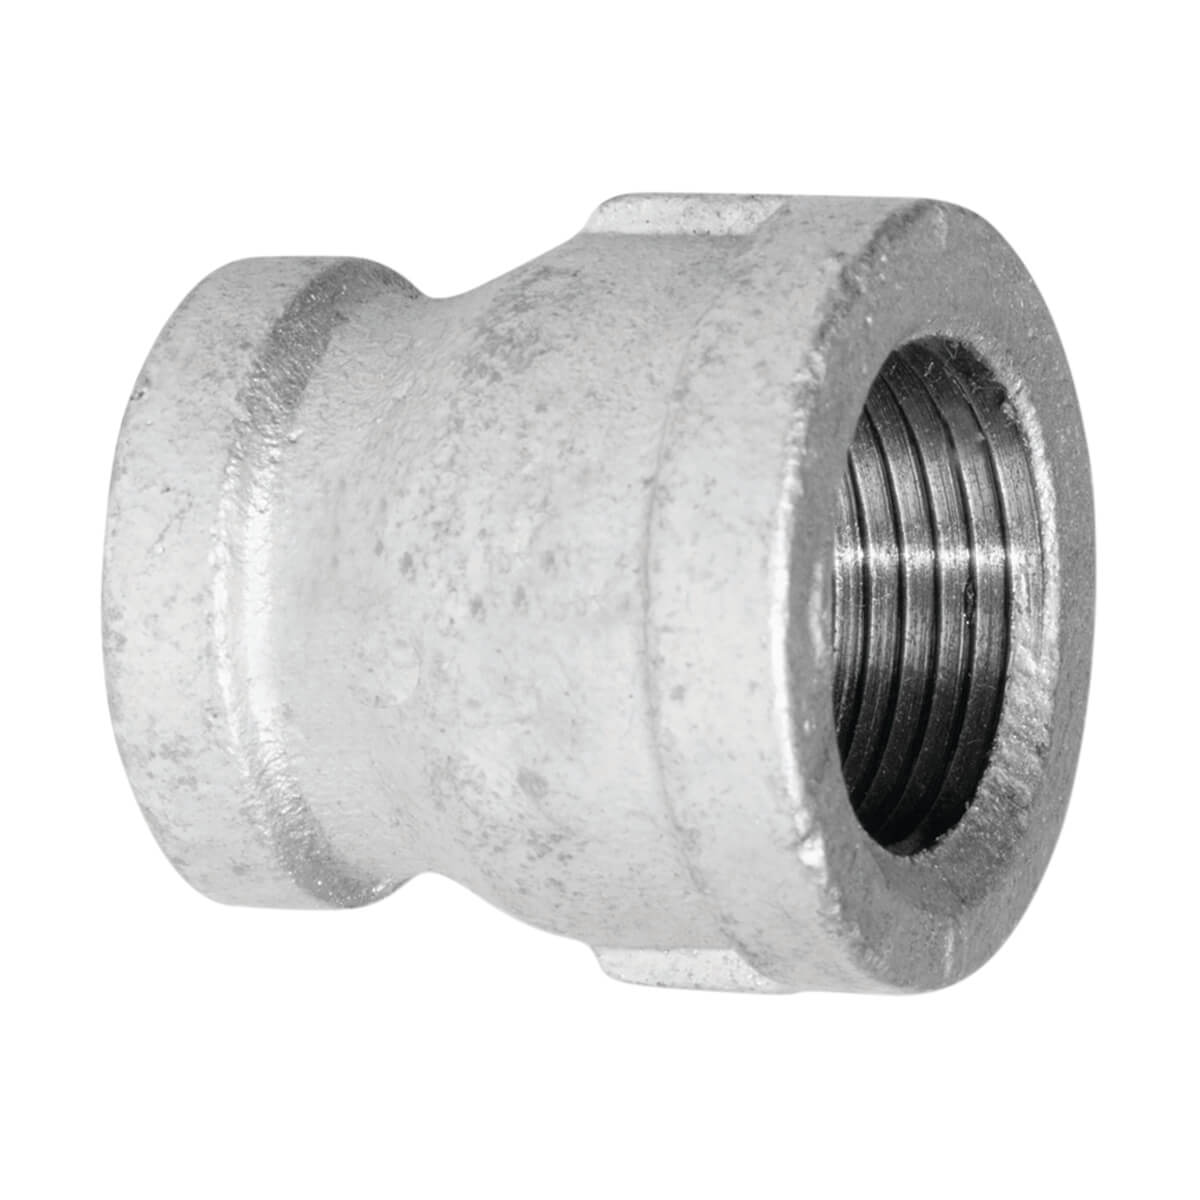 Fitting Galvanized Iron Coupling - 2-in x 3/4-in